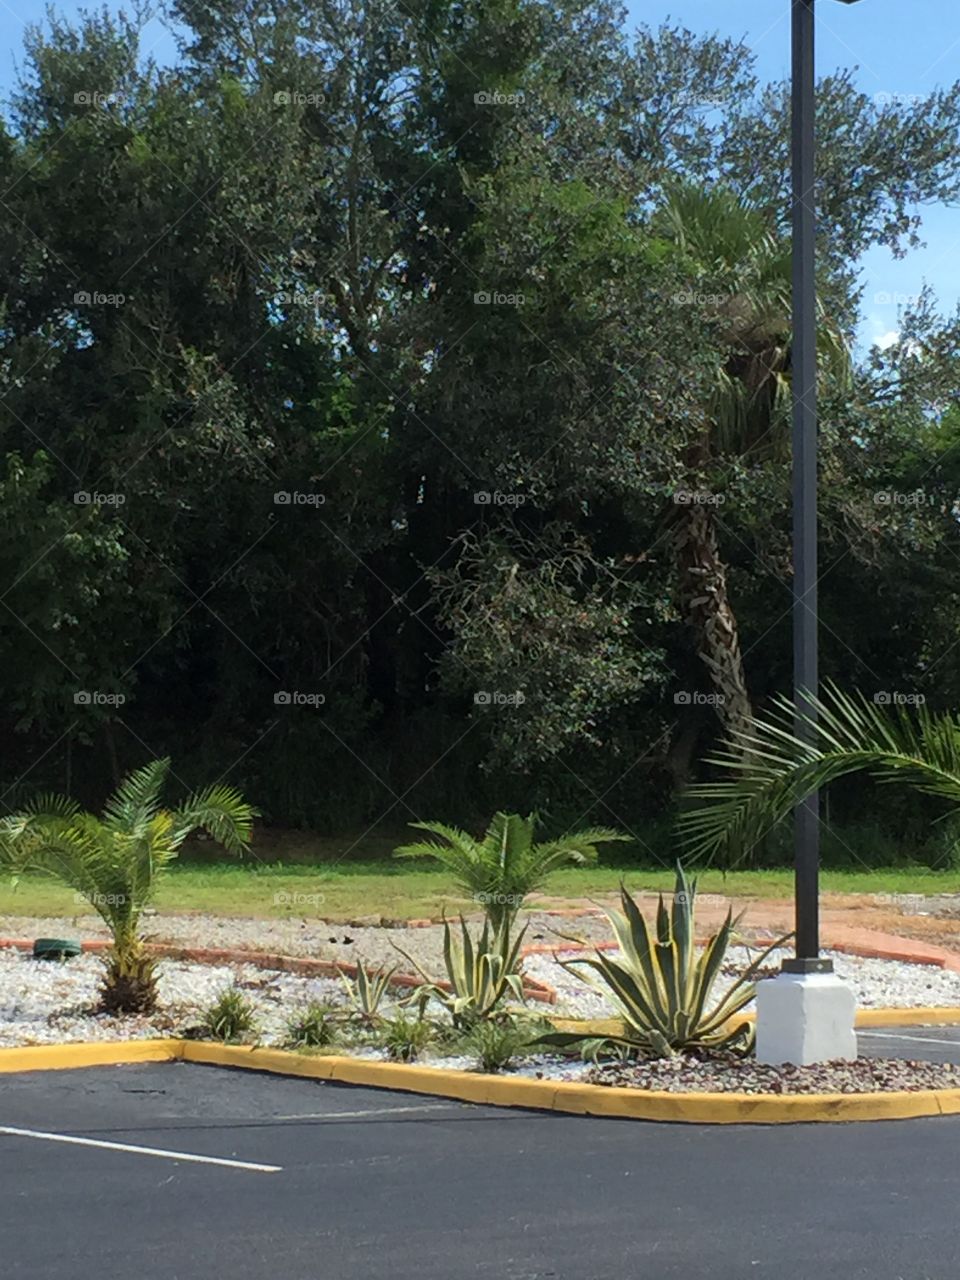 Davenport, Florida Scenery. Some greenery just across the parking lot from Days Inn.